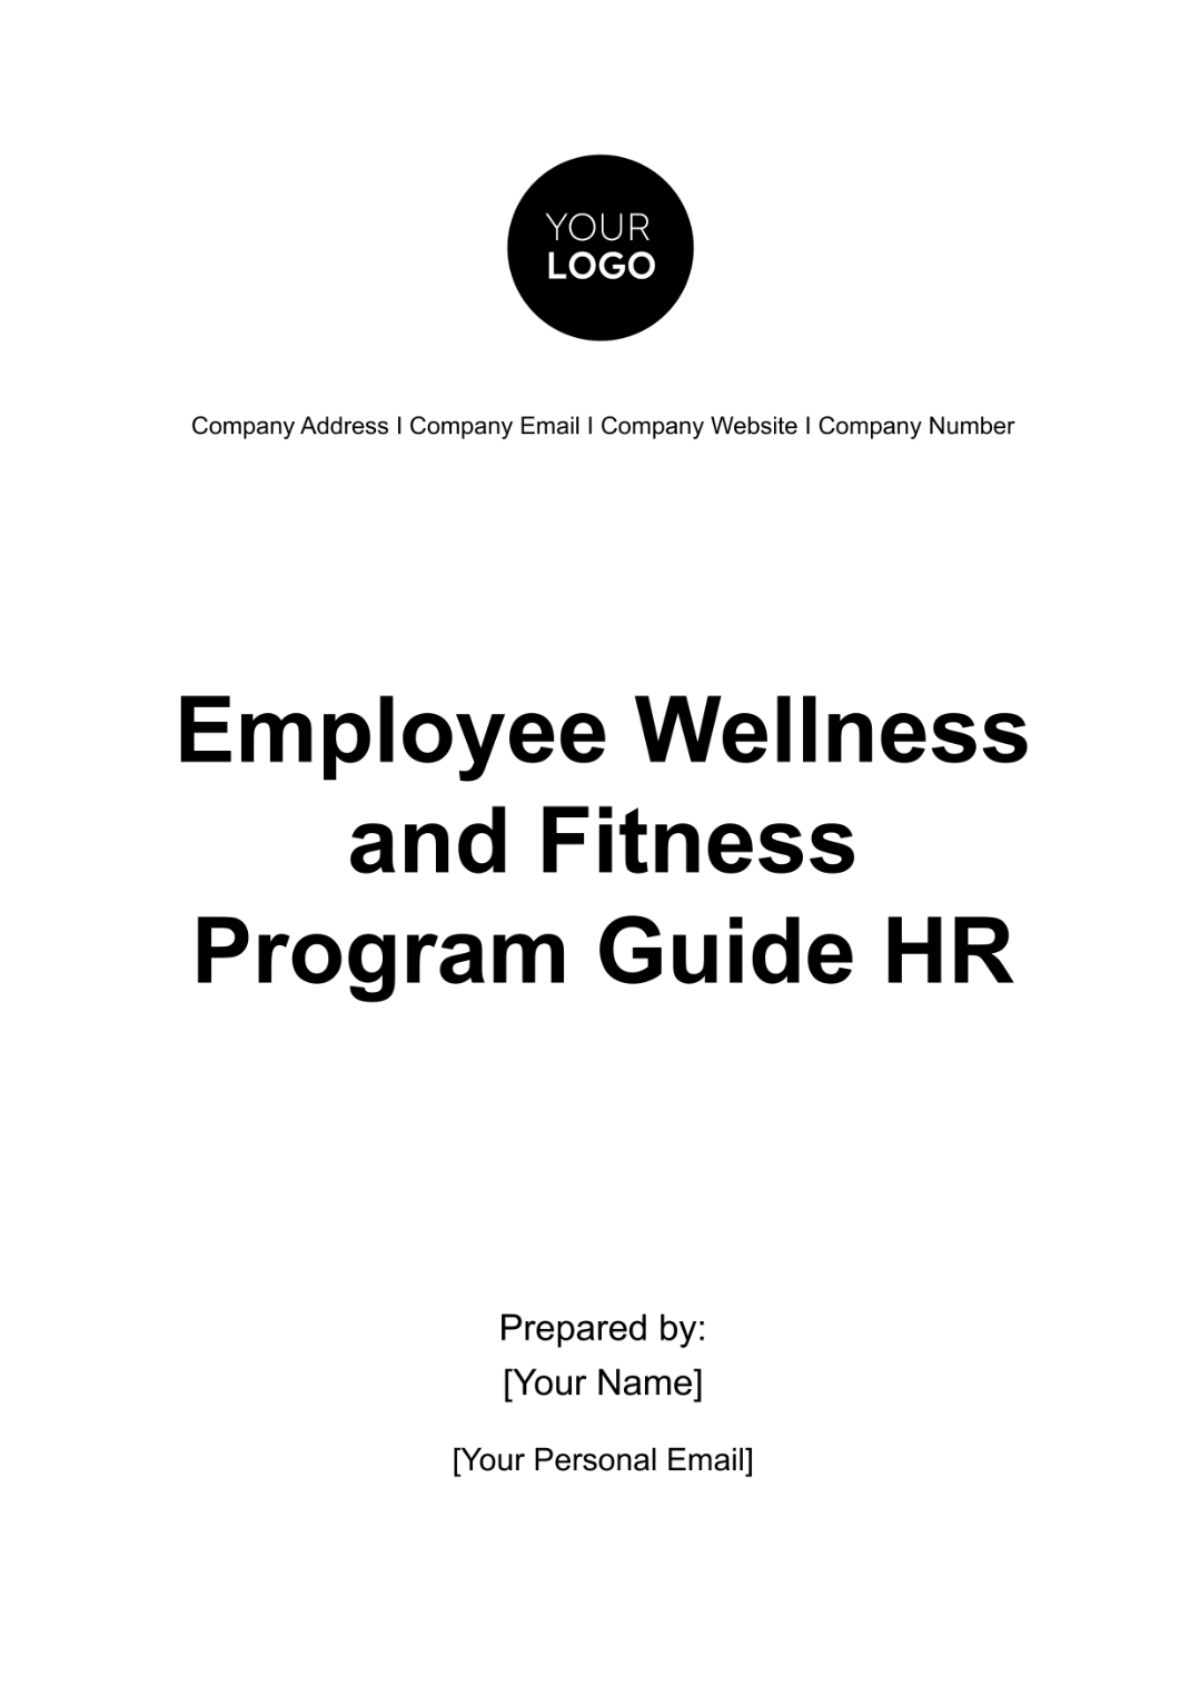 Free Employee Wellness and Fitness Program Guide HR Template